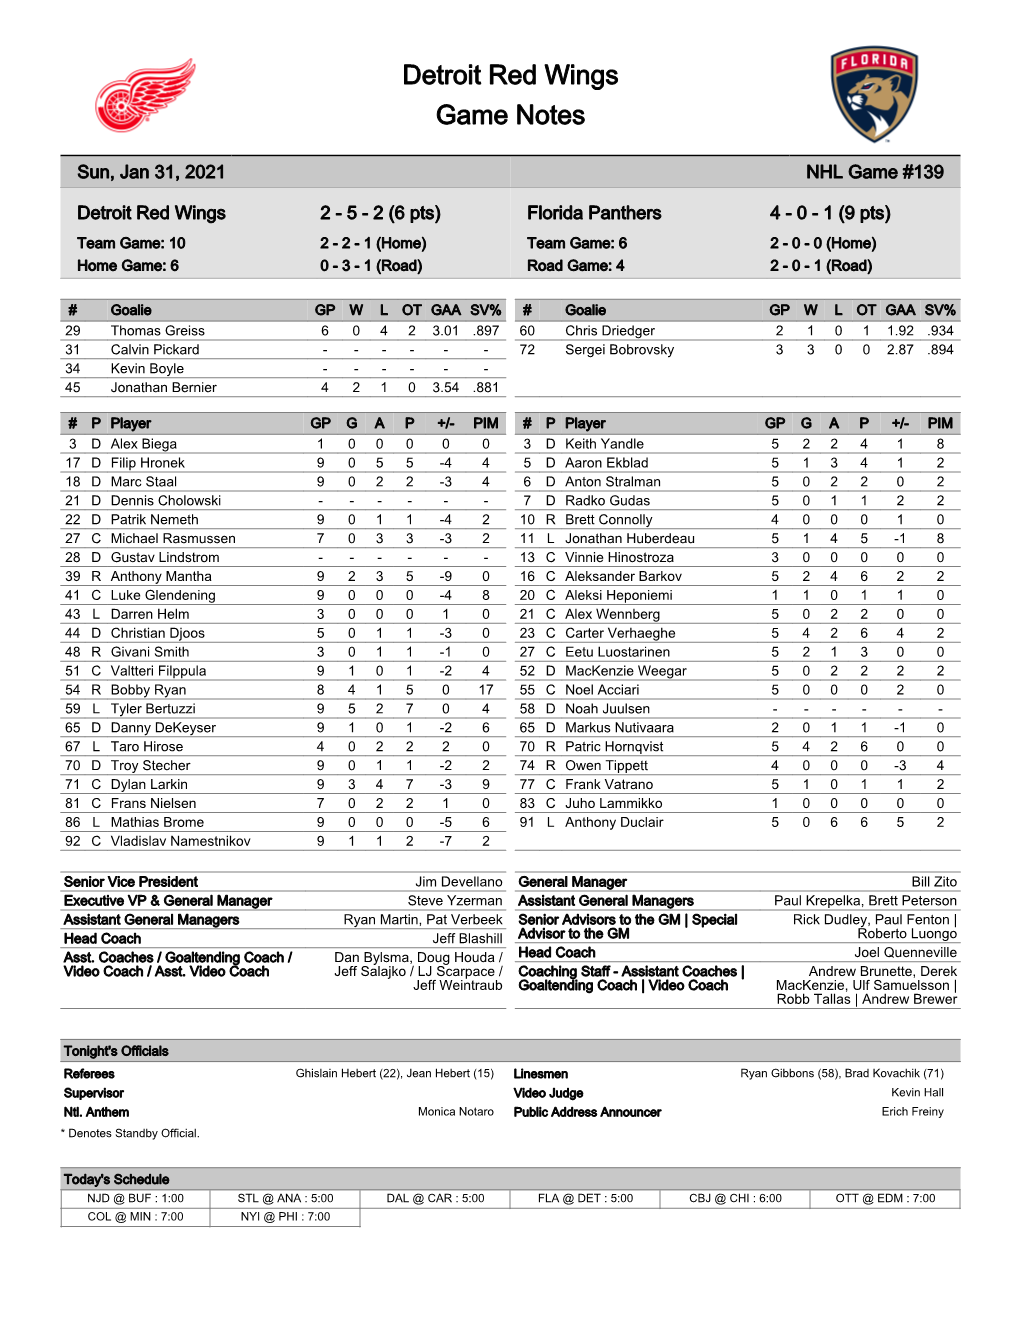 Detroit Red Wings Game Notes